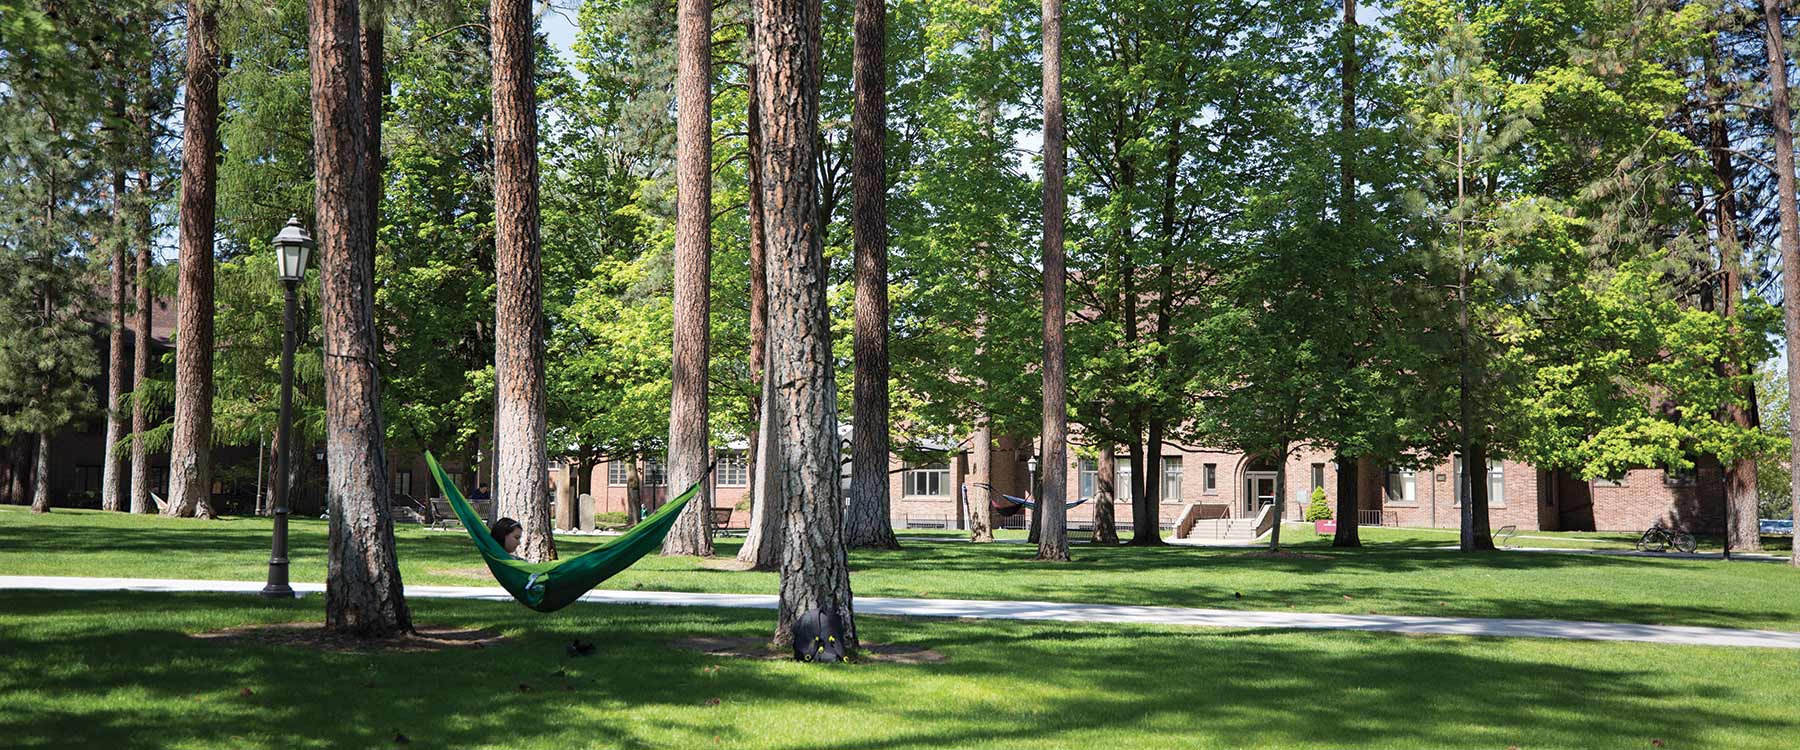 A student sits in a hammock strung between two trees.